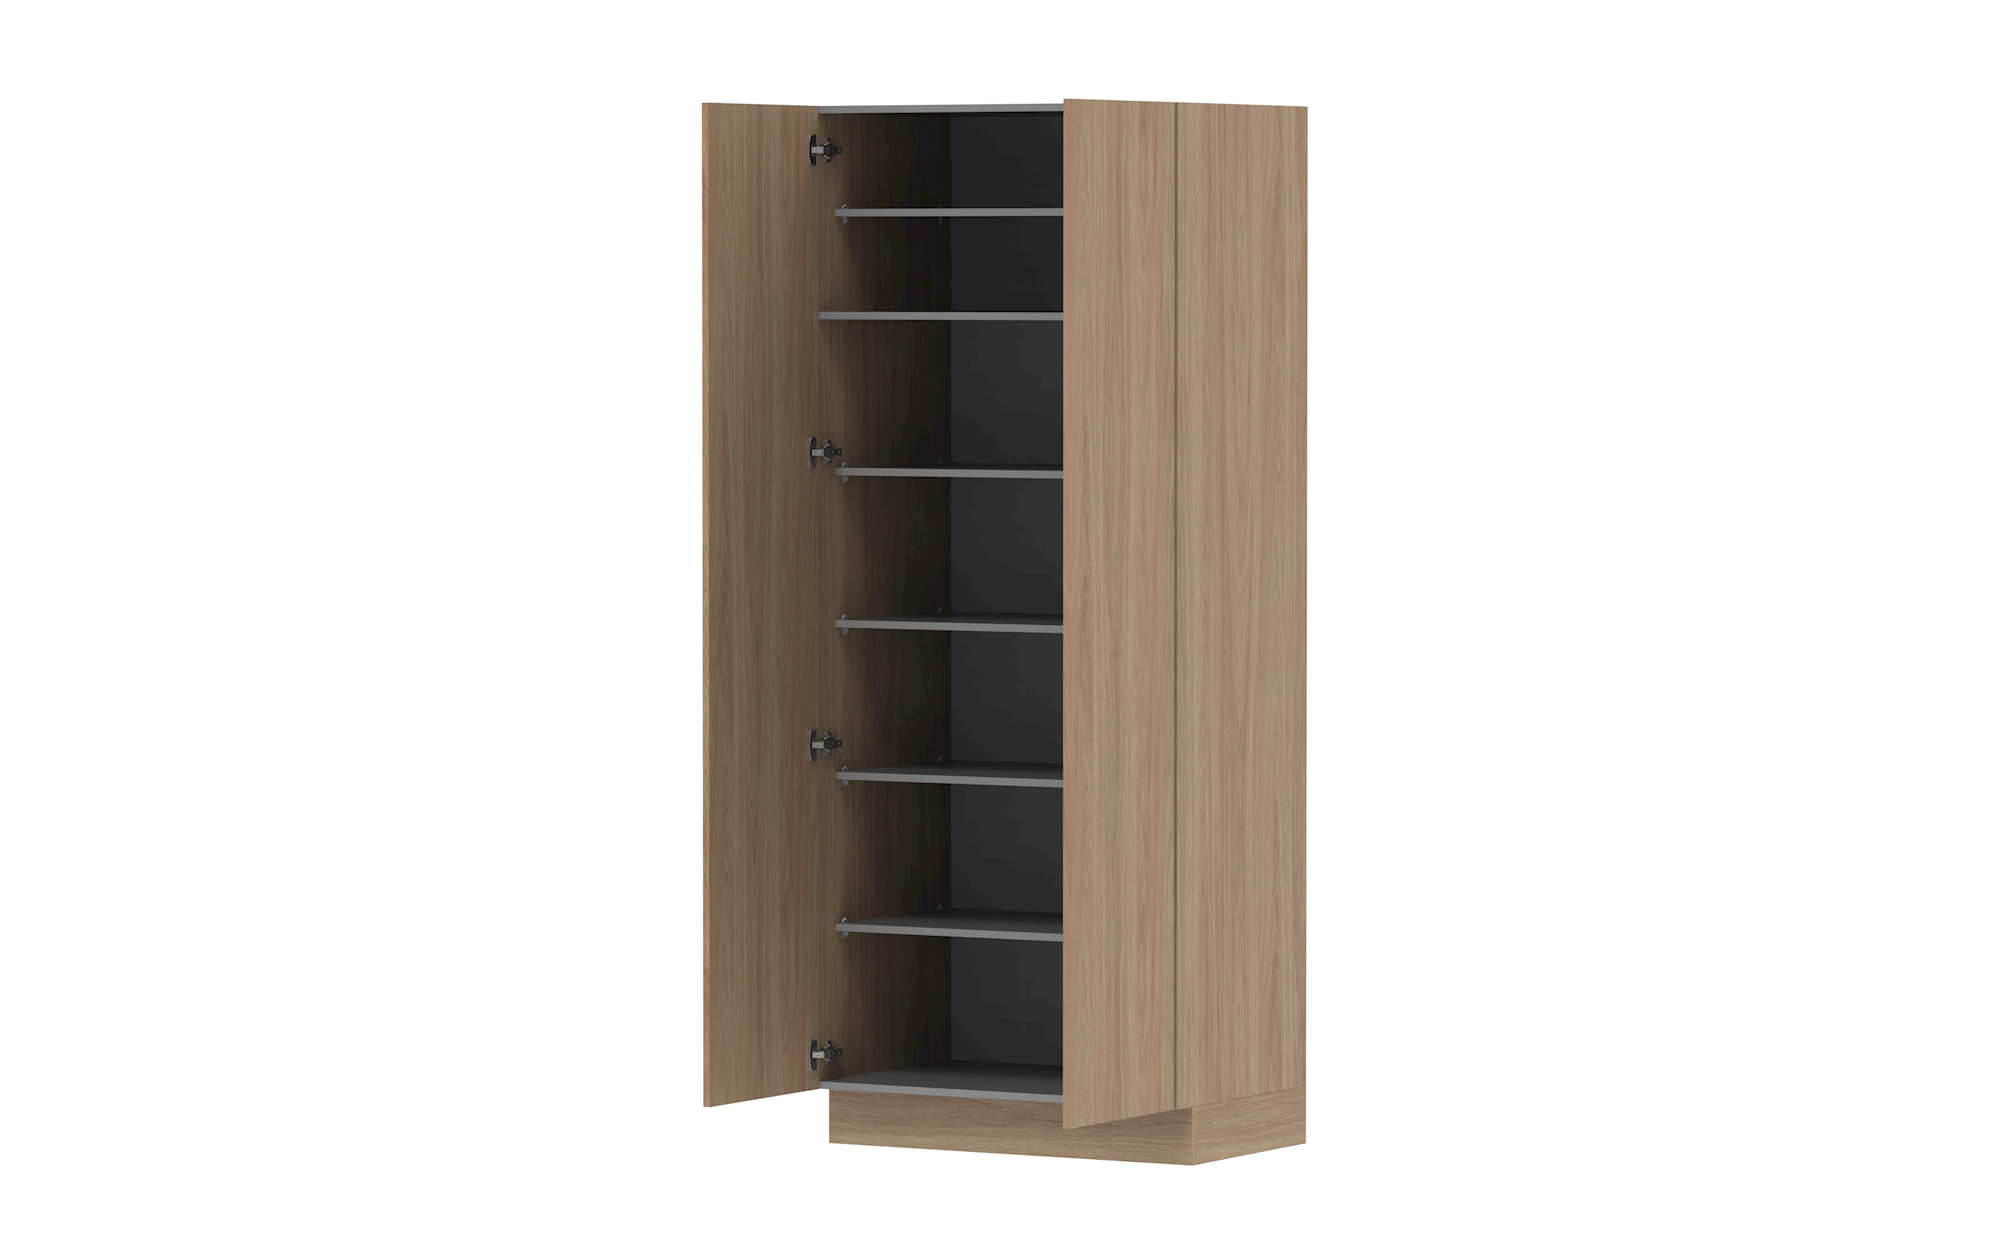 900mm Tall Cabinet - King Height